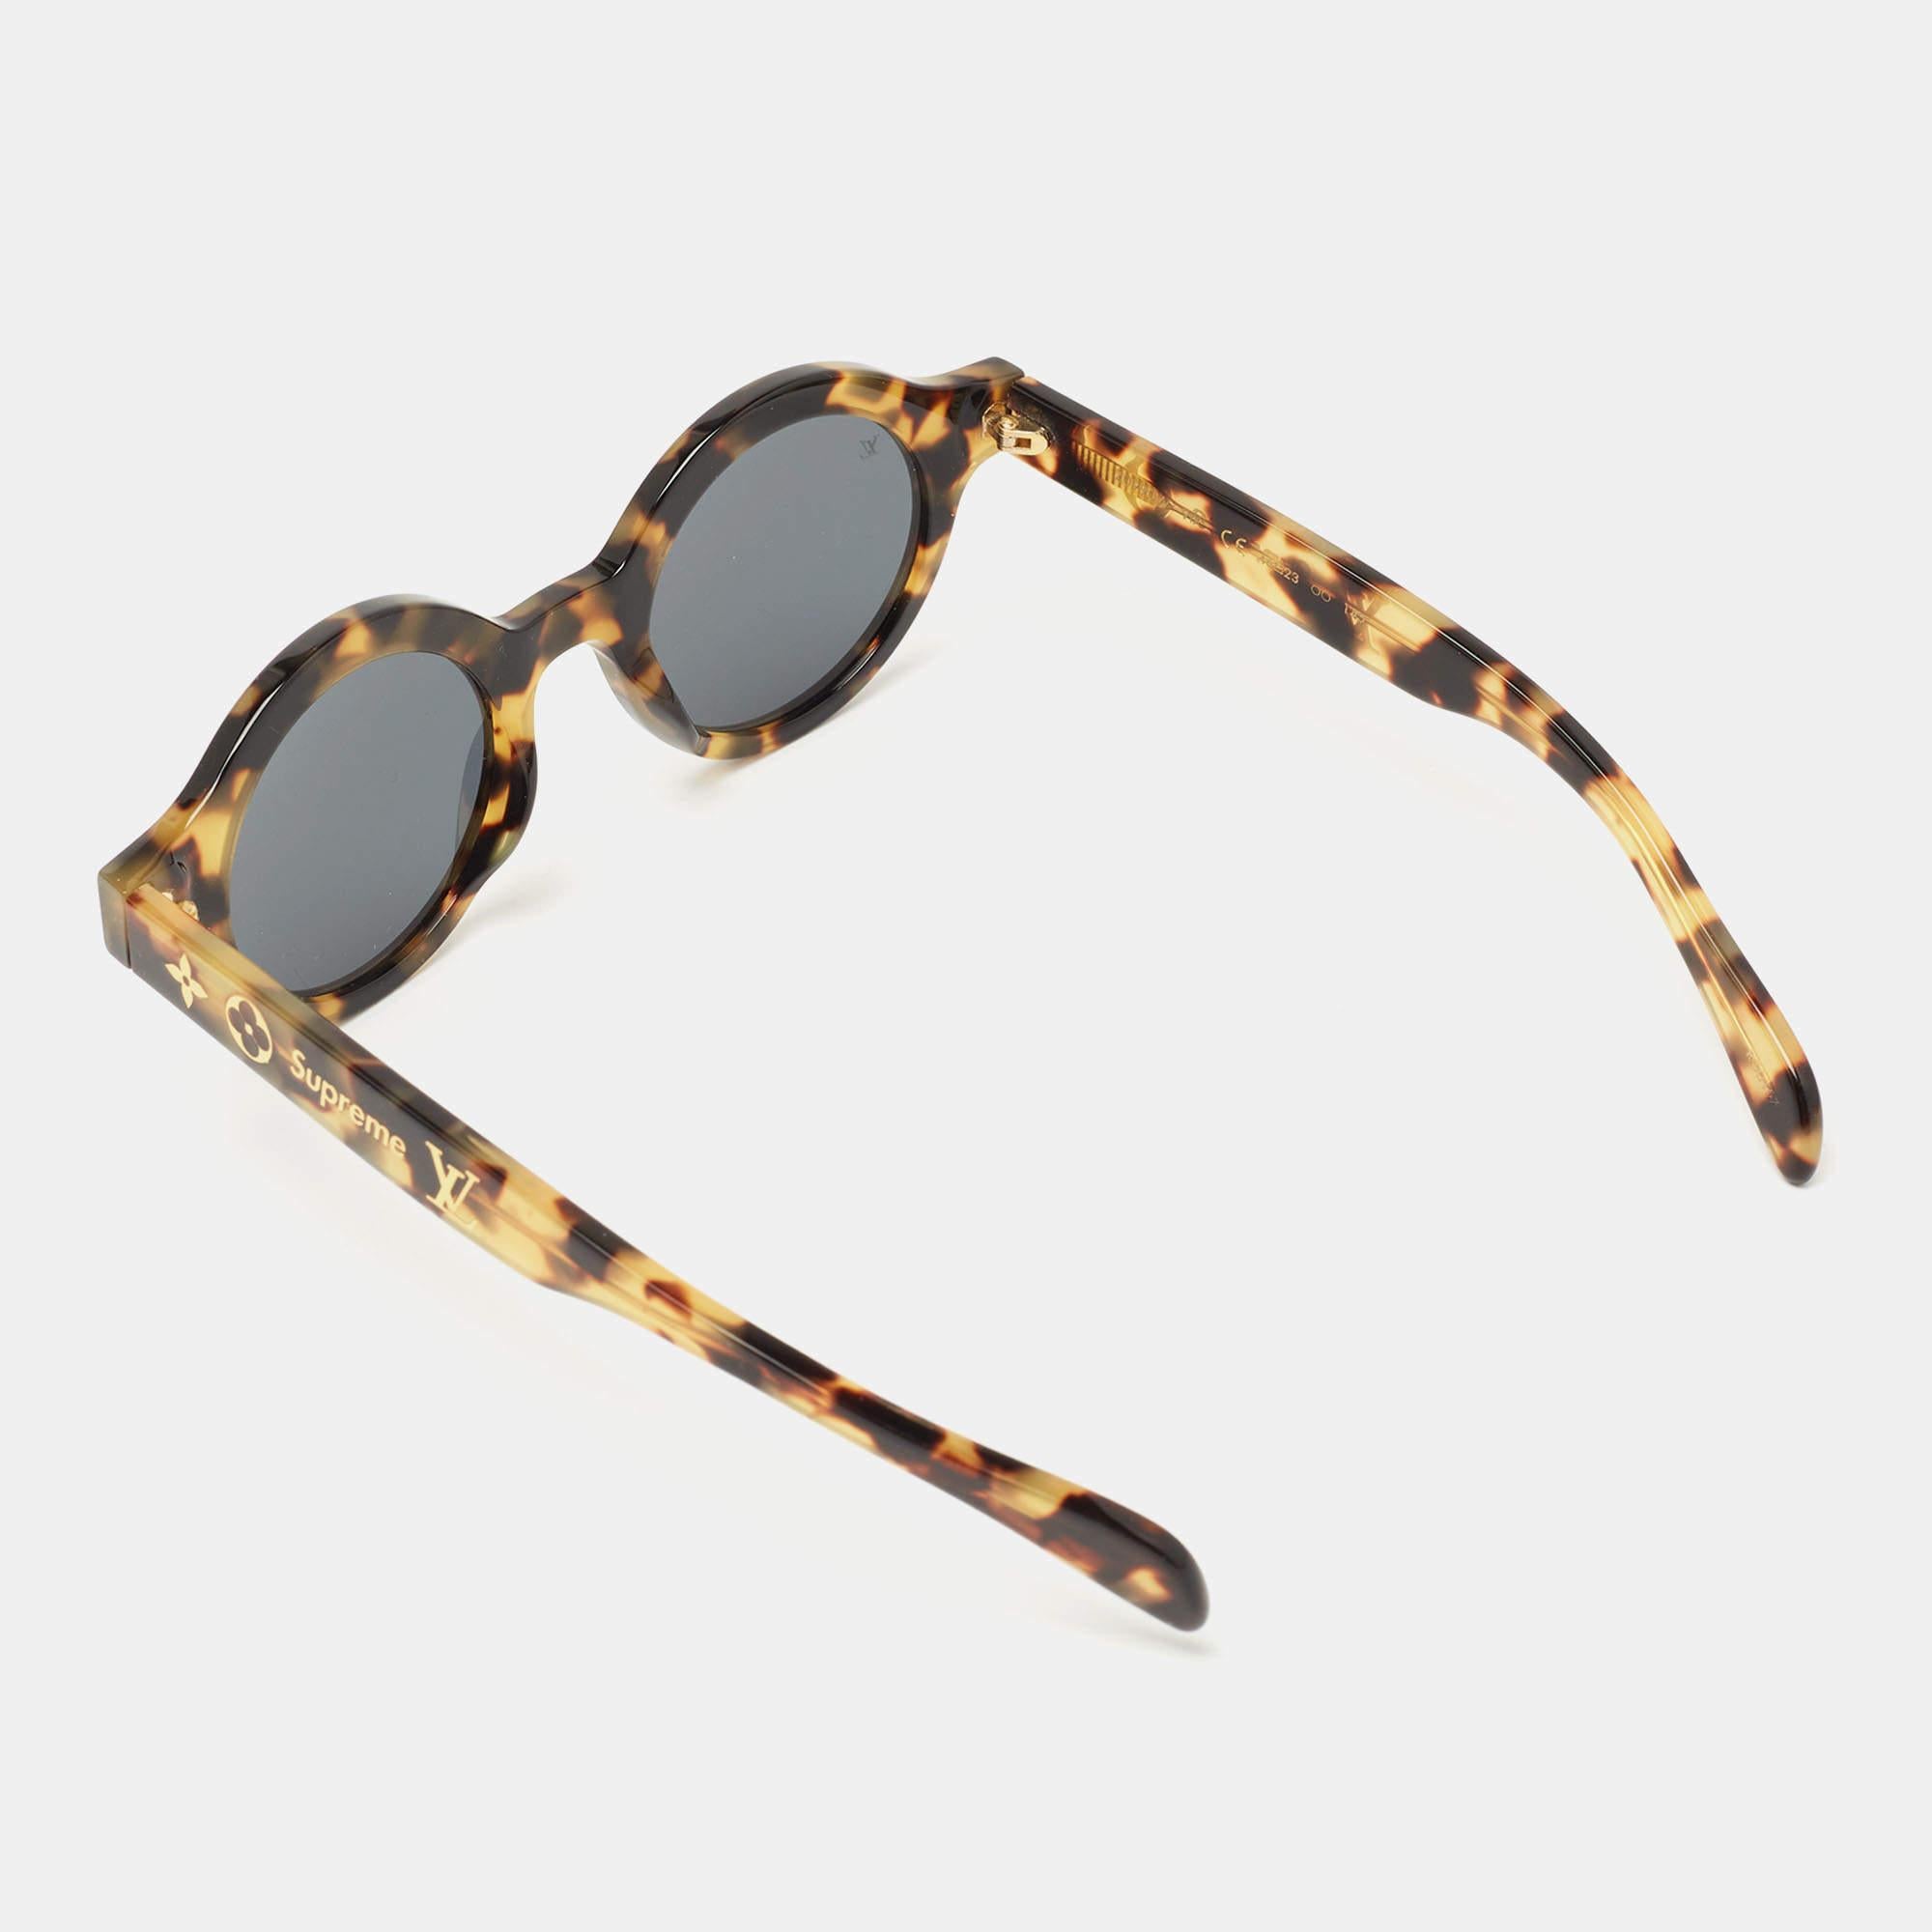 Louis Vuitton's collaboration with NYC streetwear brand, Supreme, was such a fresh merge that, to this day, the designs from that line are sought-after. This gorgeous pair of sunglasses from the collaboration has a tortoise round frame with LV